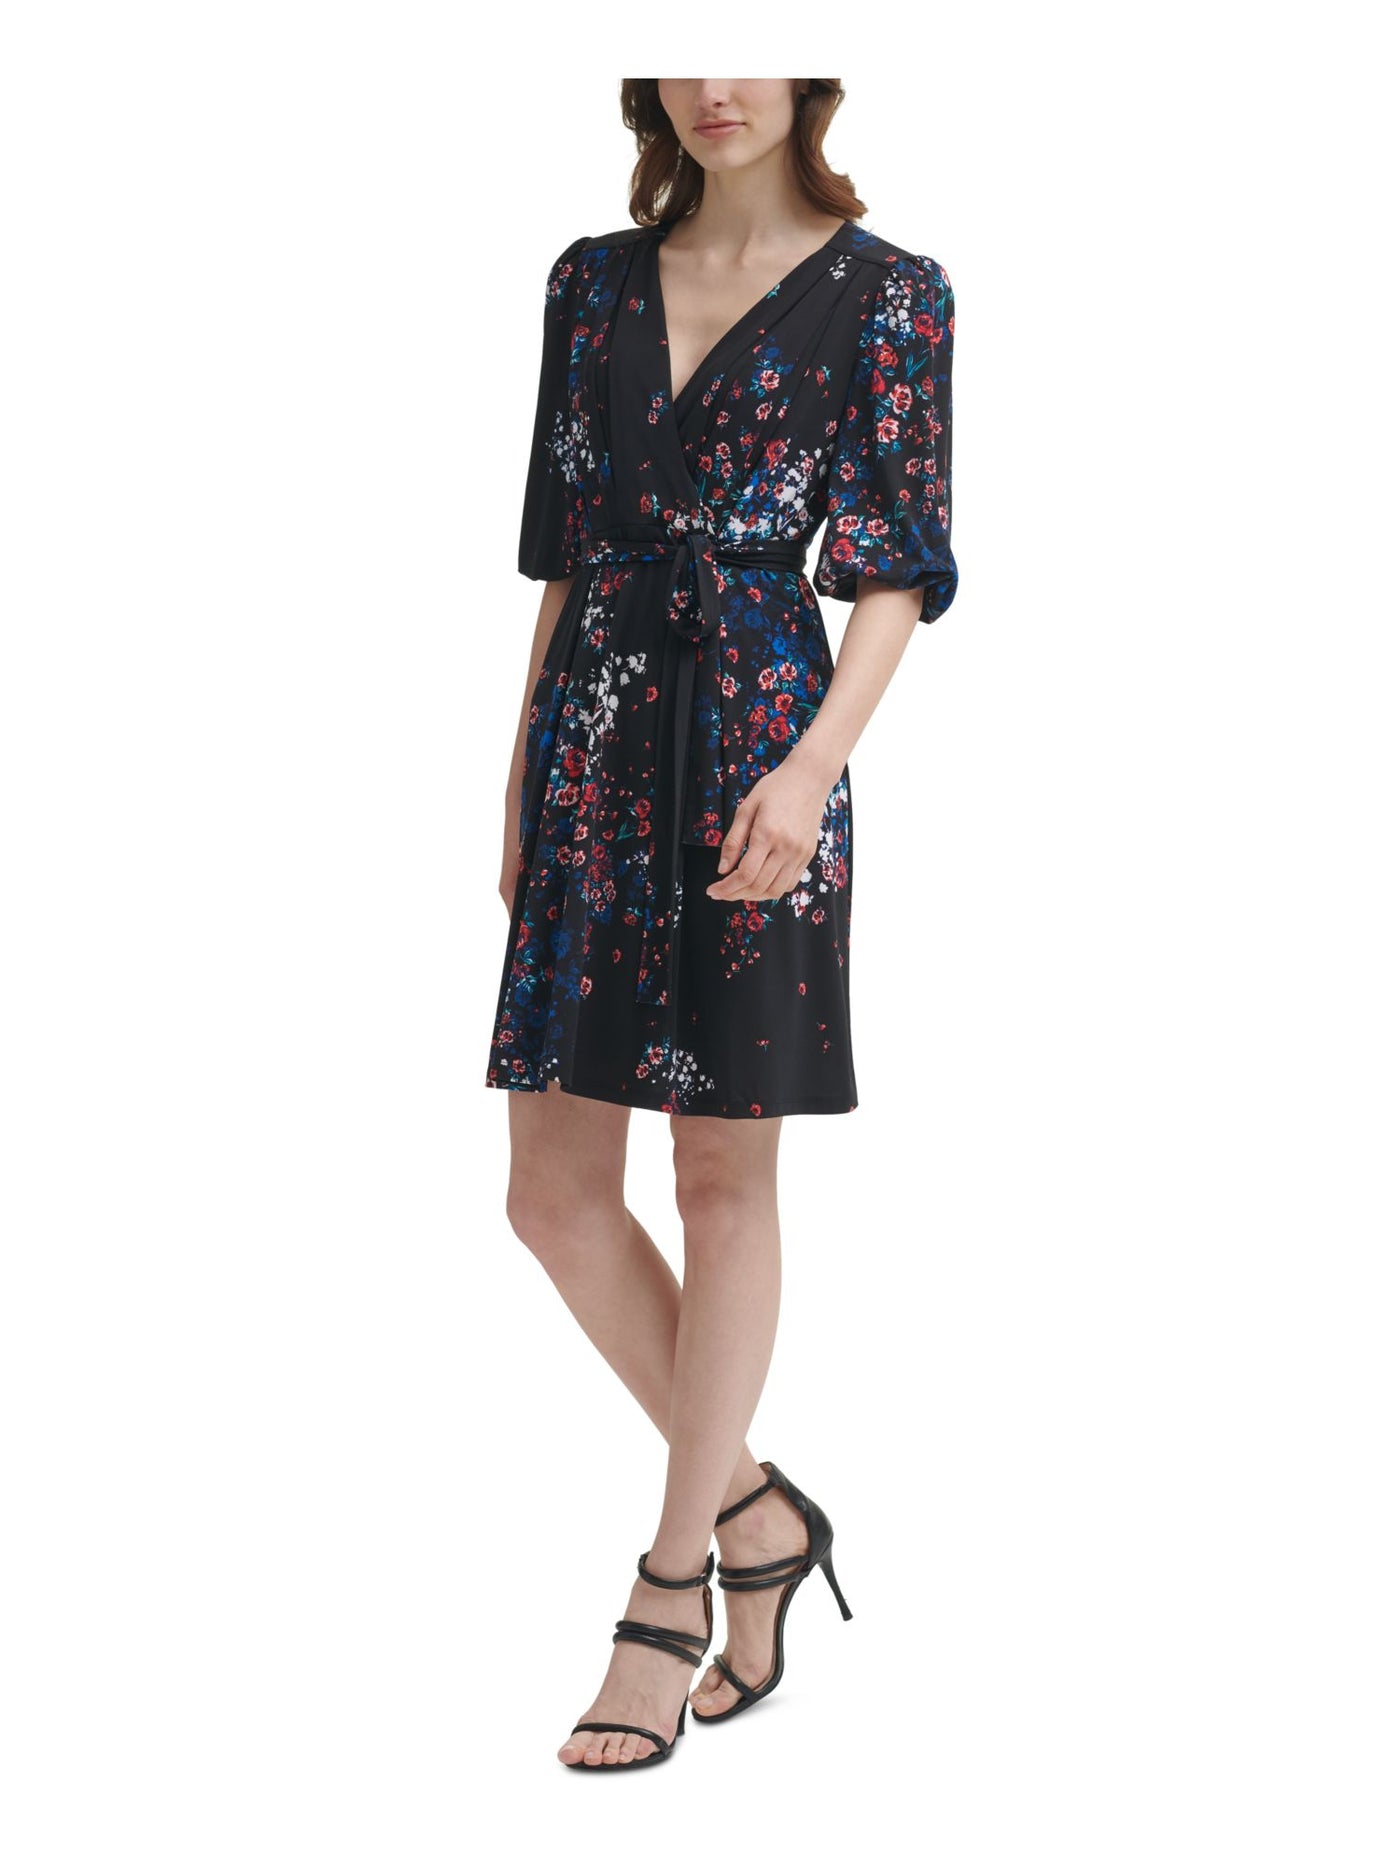 DKNY Womens Black Zippered Tie Floral Surplice Neckline Above The Knee Cocktail Shift Dress 10